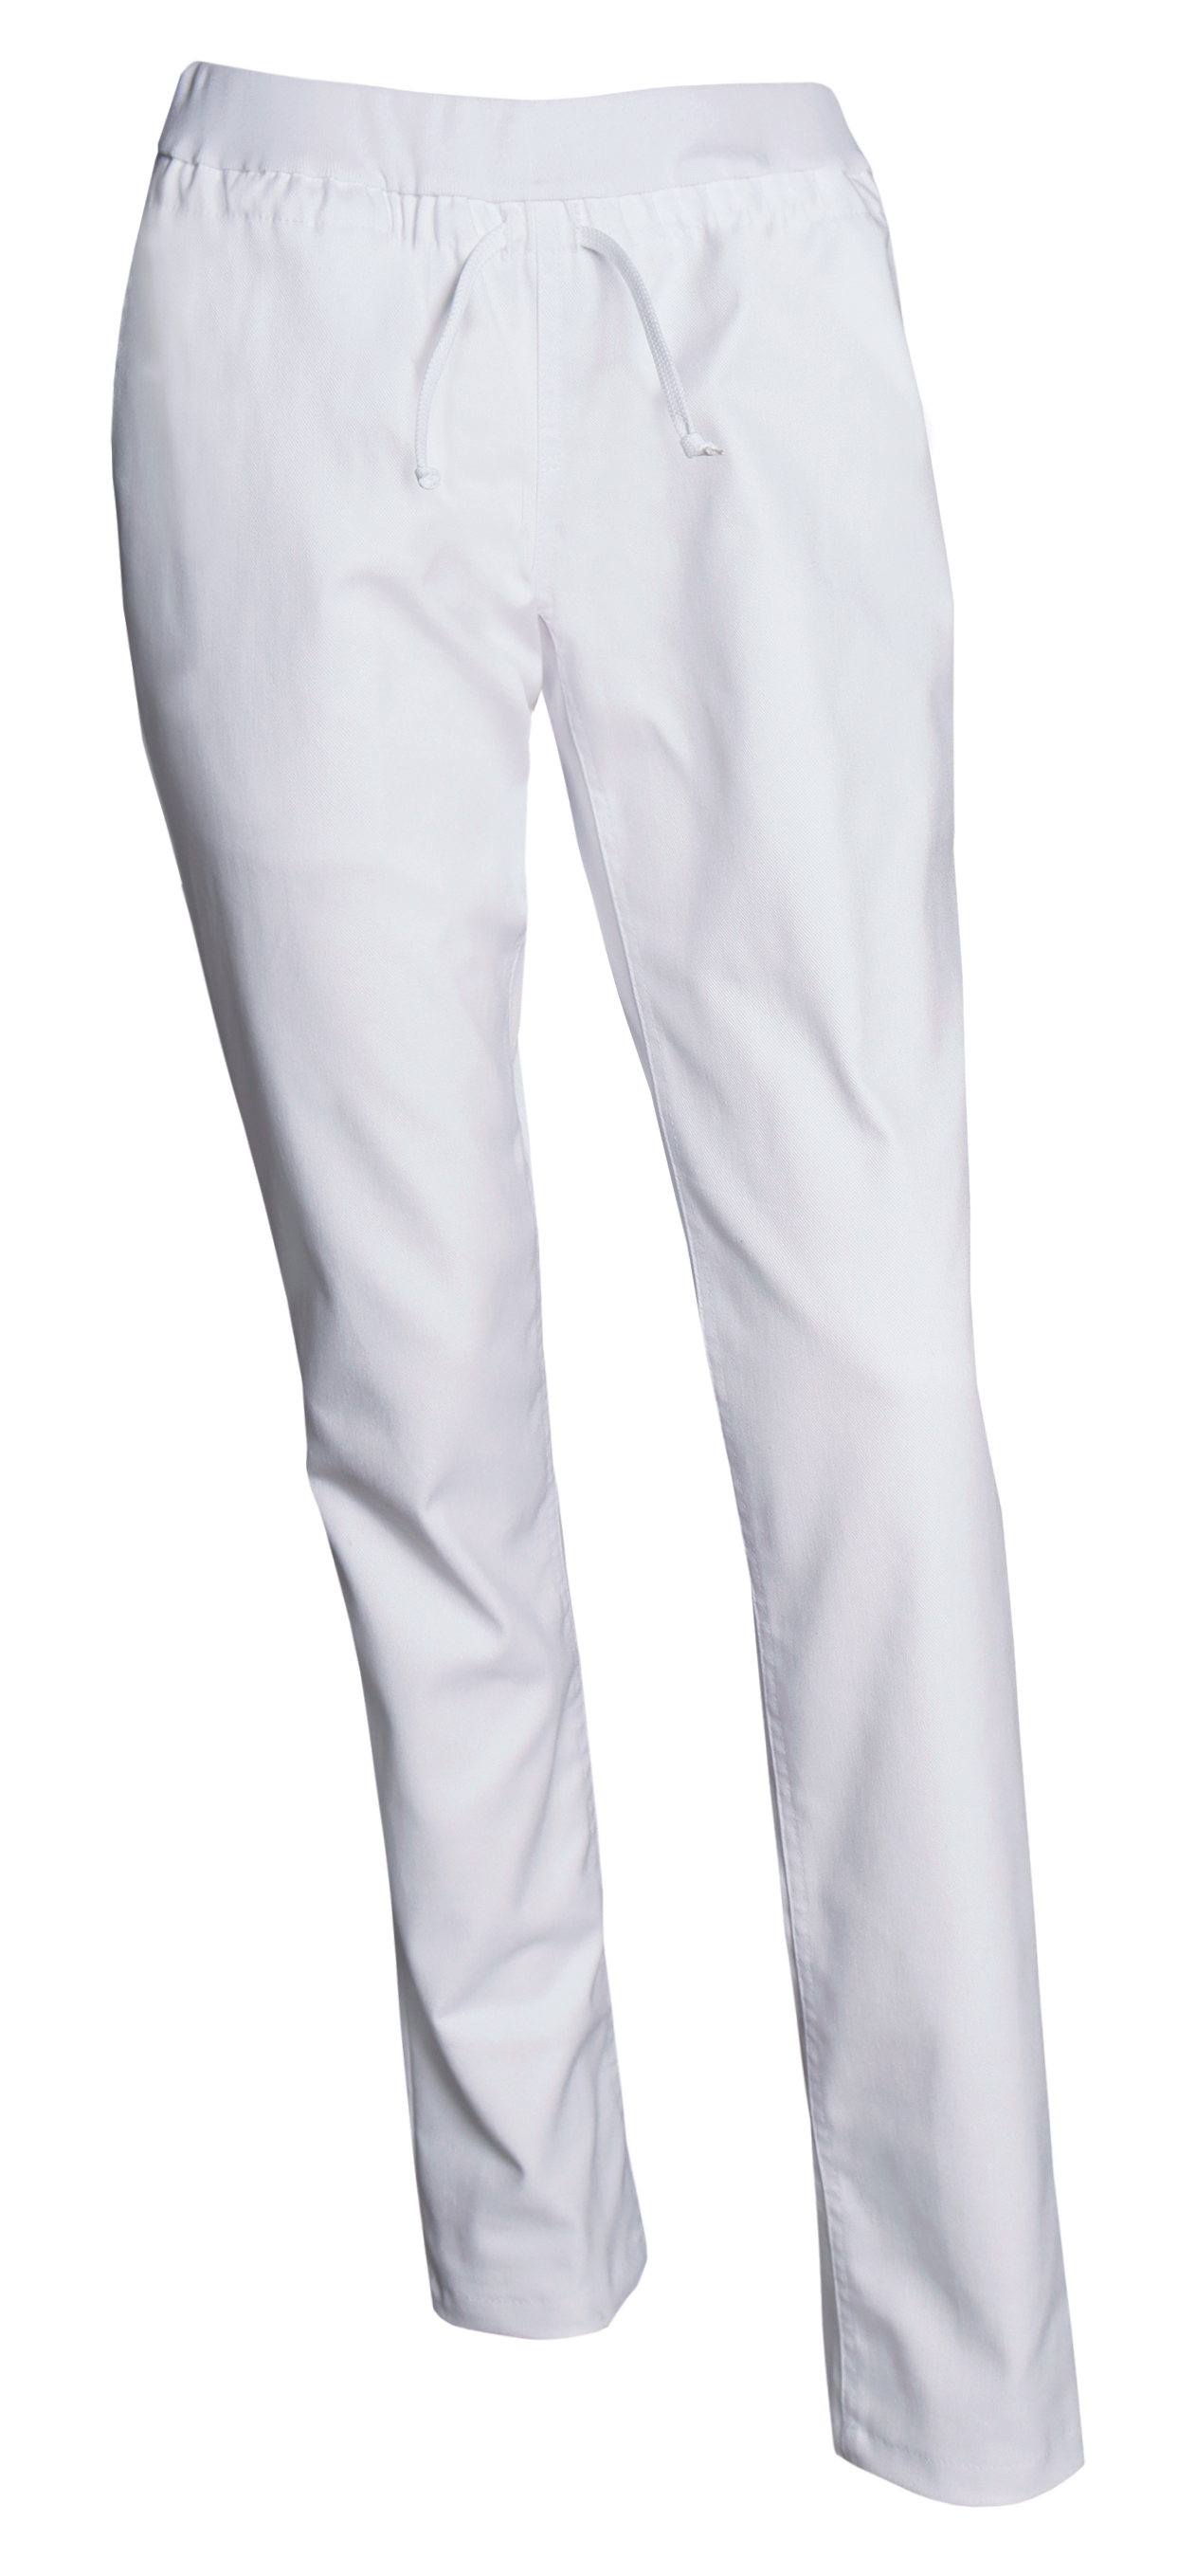 White Pull-on Jeans, Harmony (5050421)